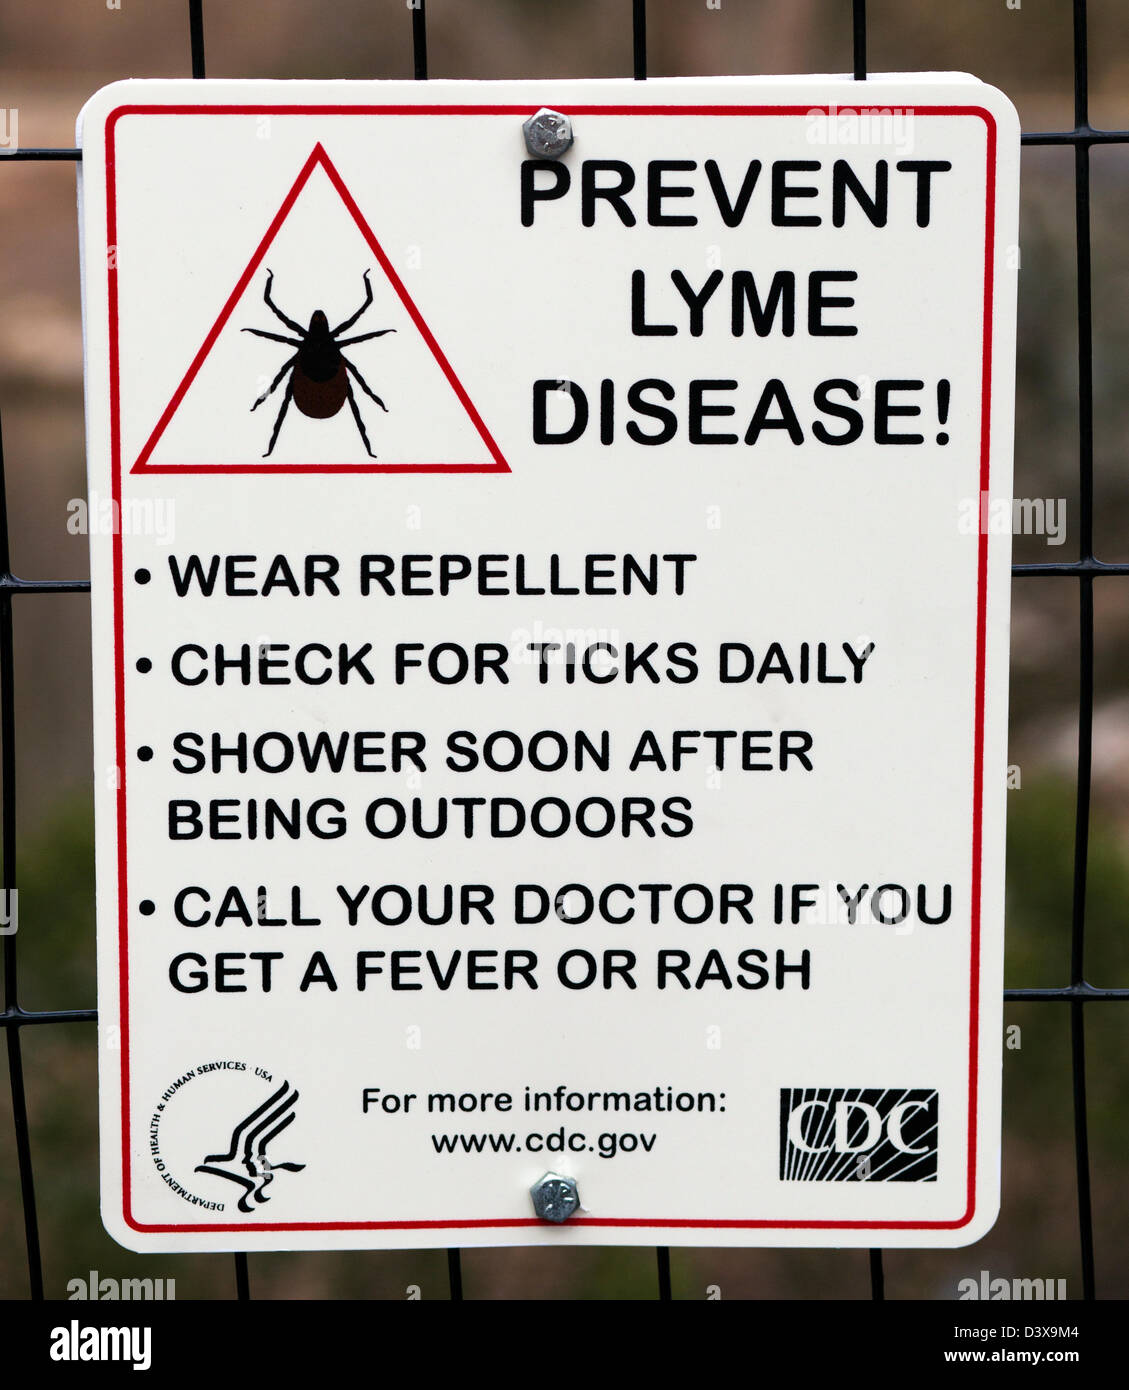 Lyme disease prevention sign. Stock Photo